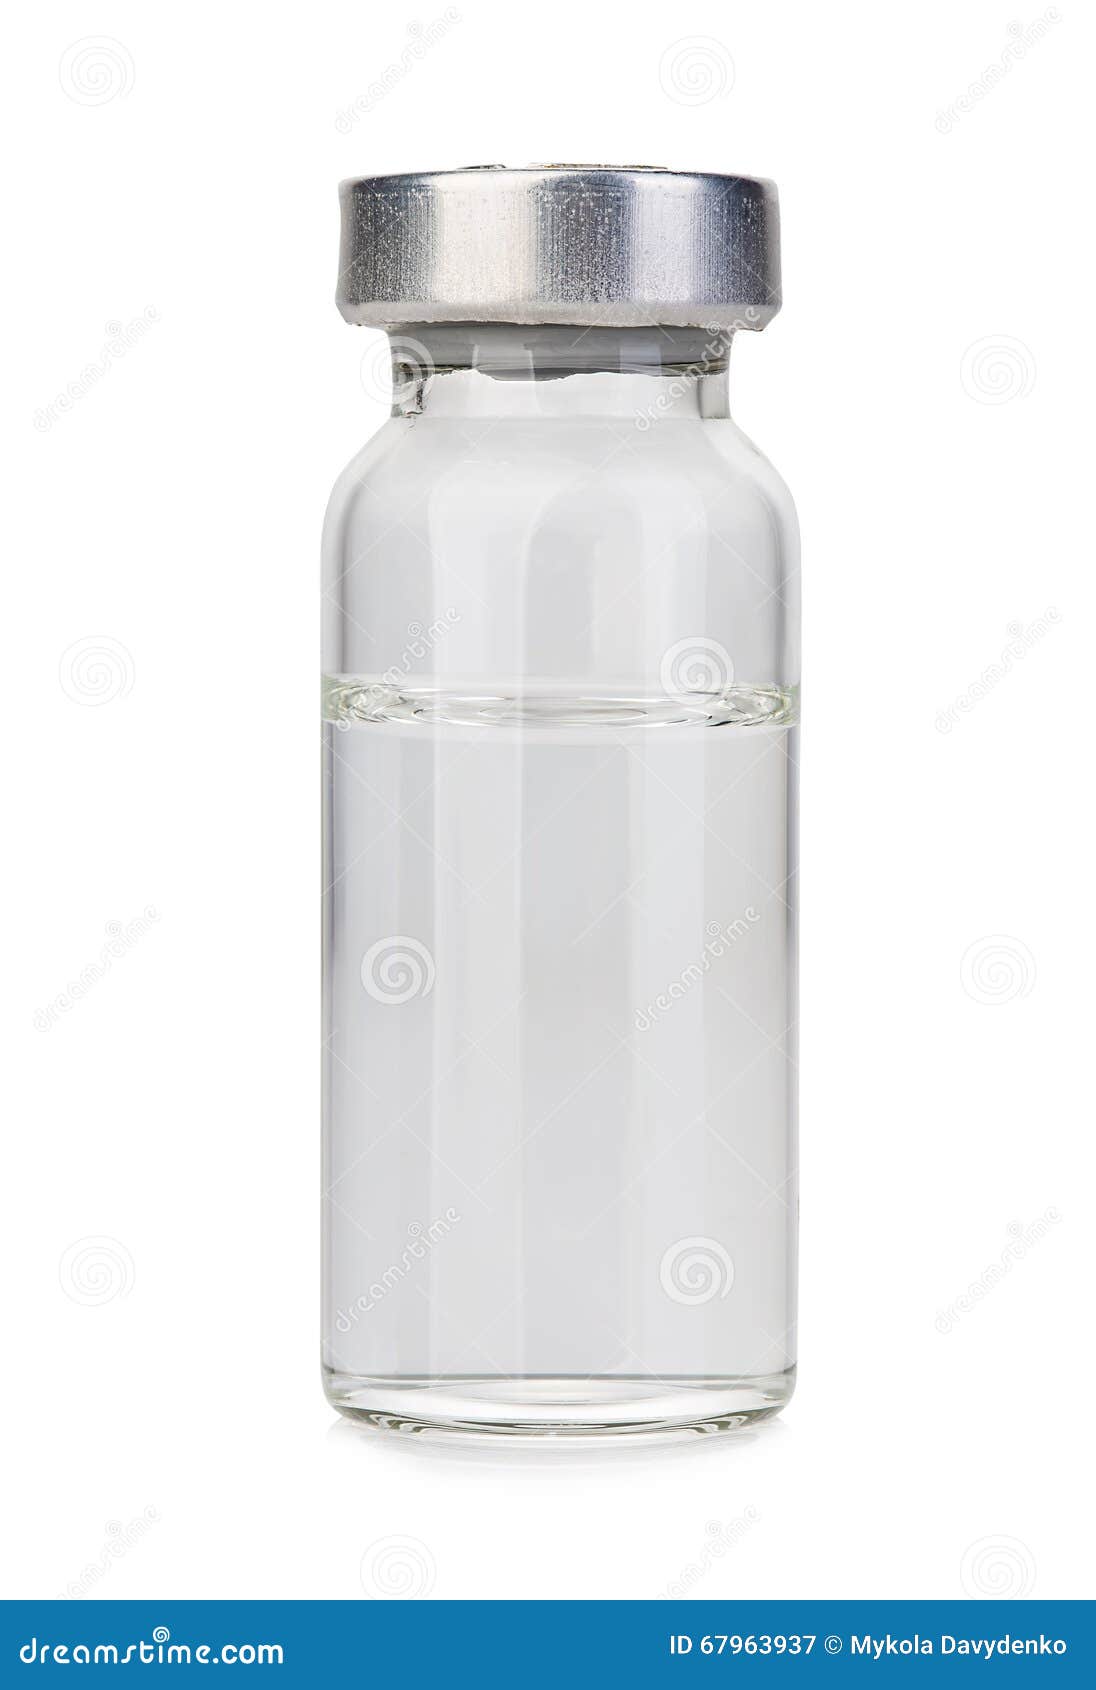 glass vial medical close-up  on a white background.